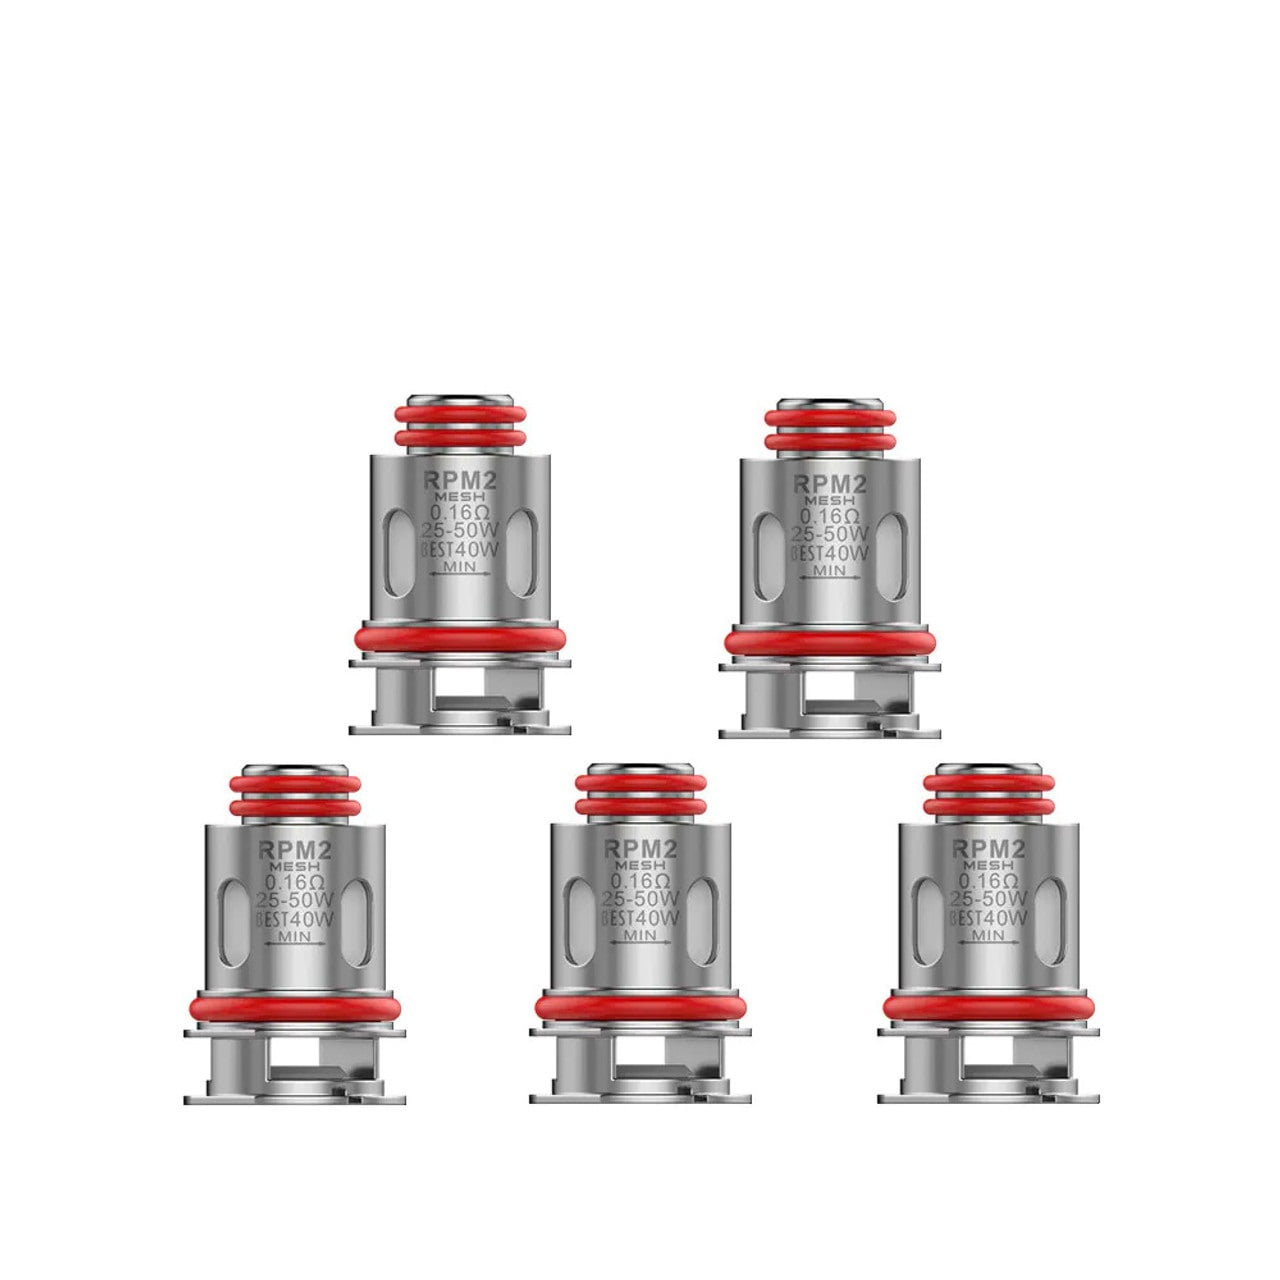 SMOK RPM 2 REPLACEMENT COIL - PACK OF 5